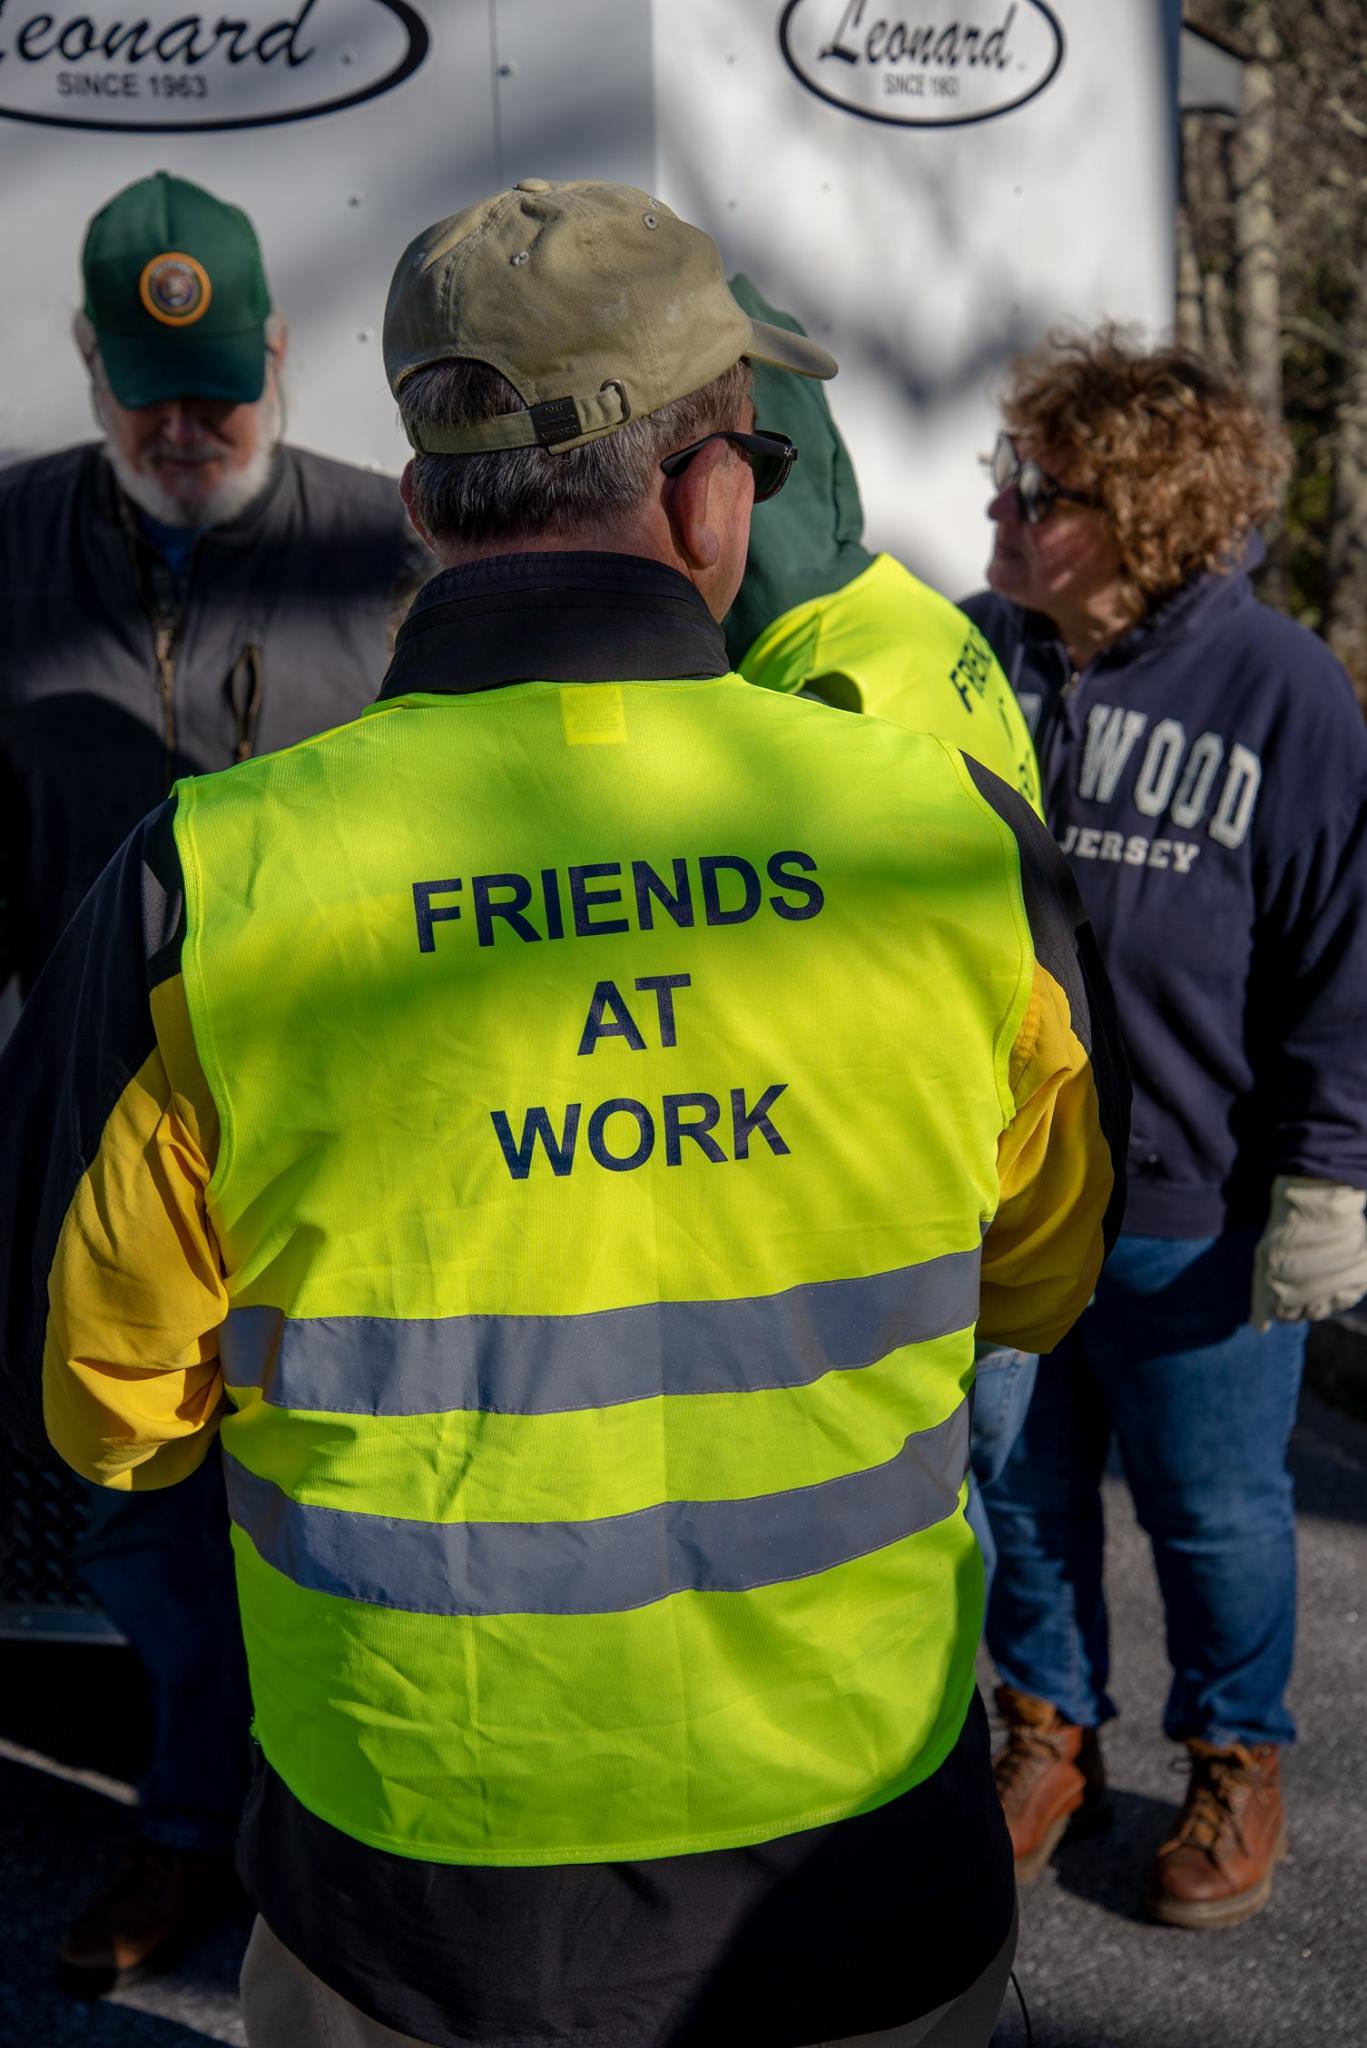 Volunteers wear yellow vests during the Project Parkway cleanup event.